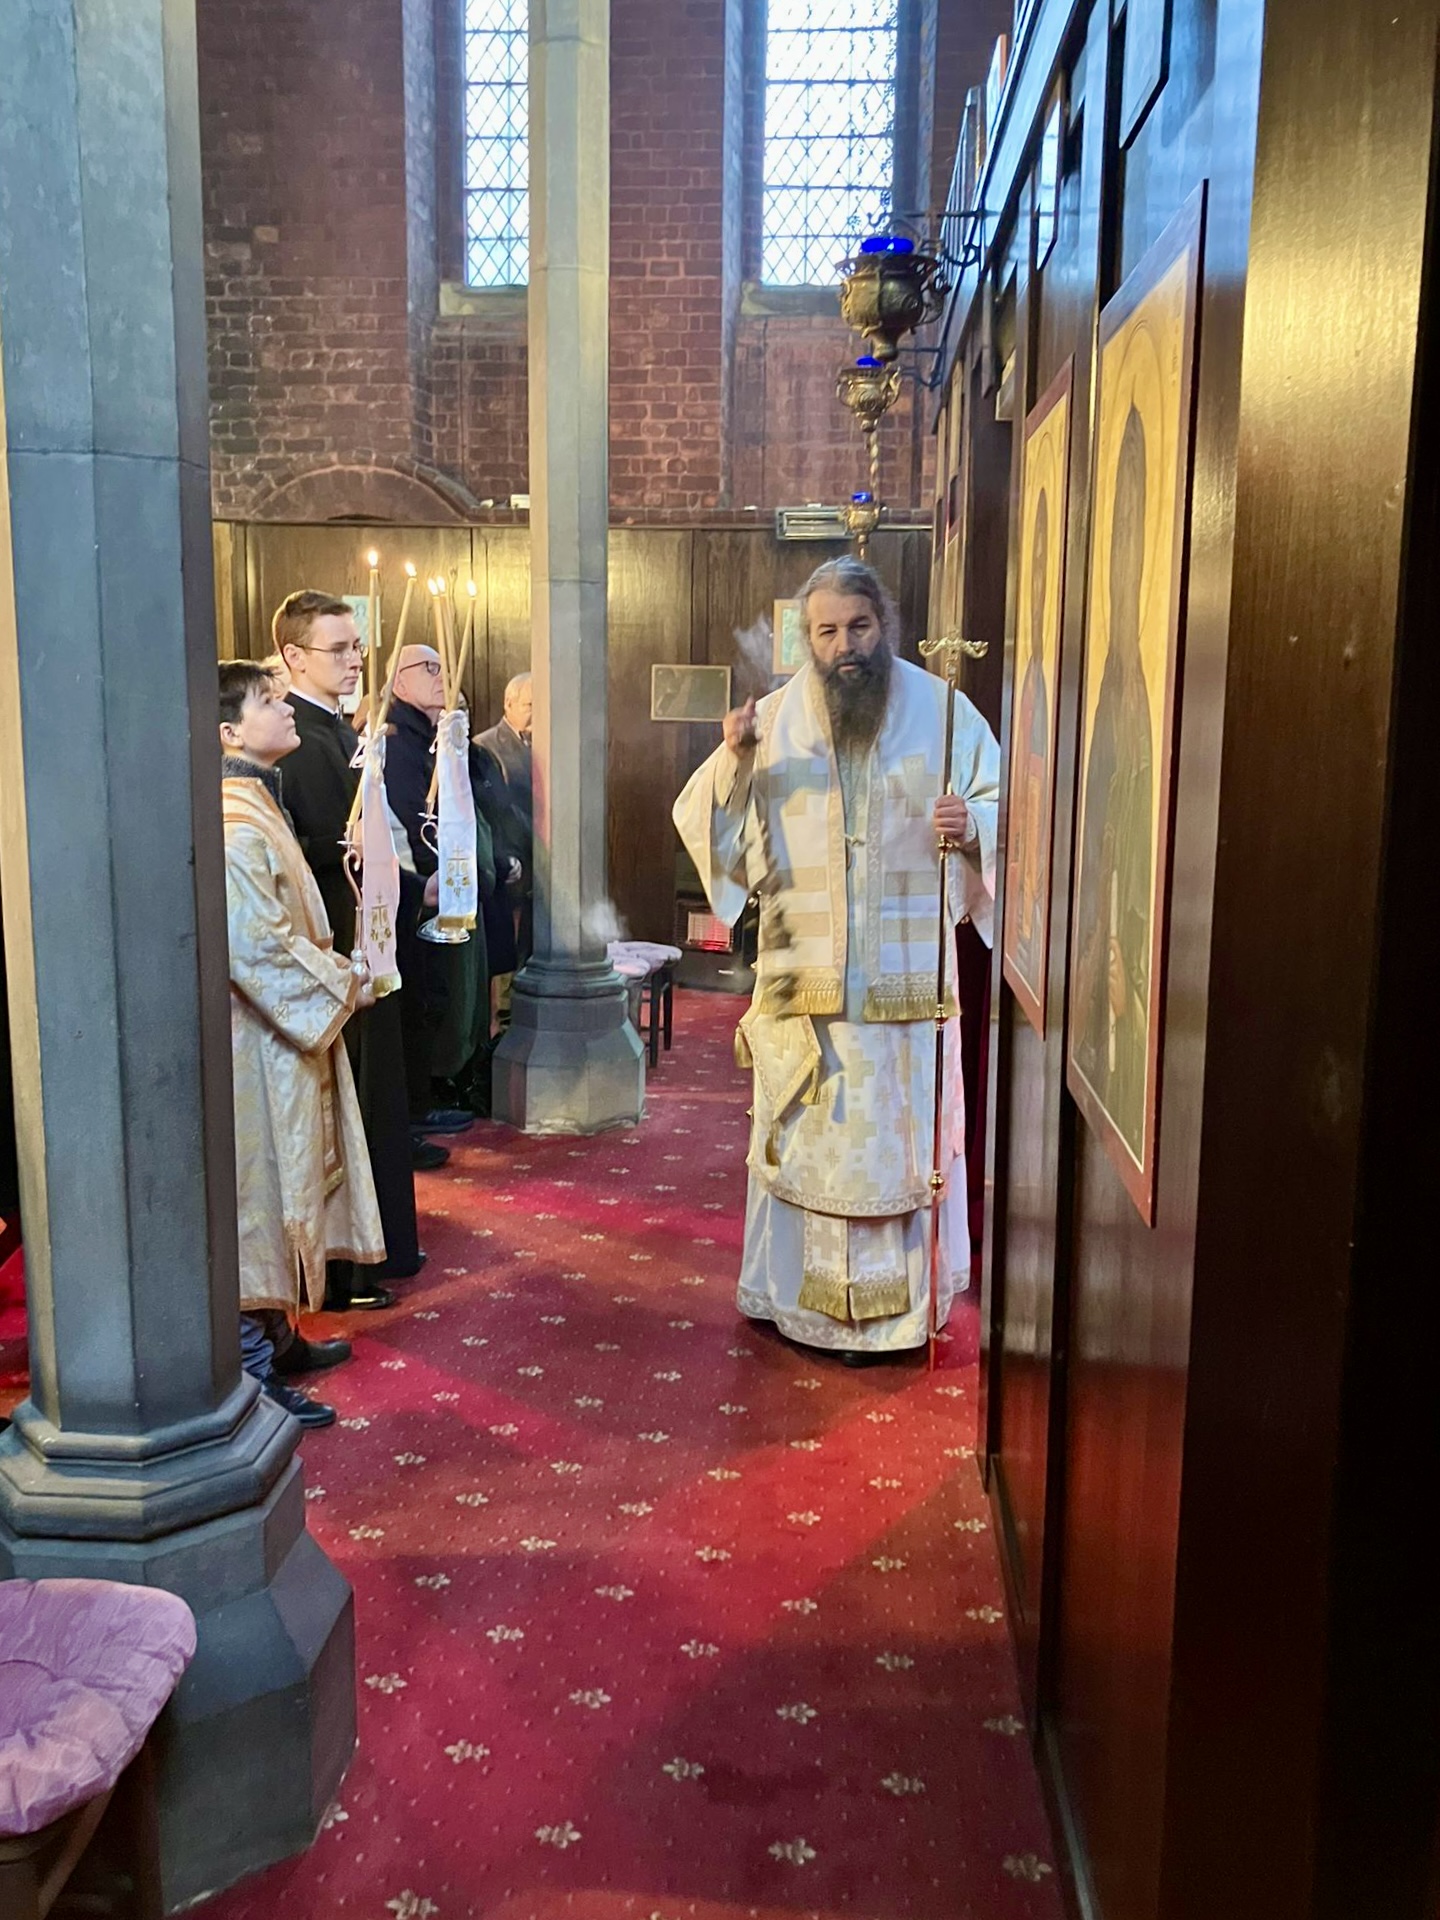 Bishop of Ilion visited Orthodox Parish of Annunciation in Middlesbrough, England